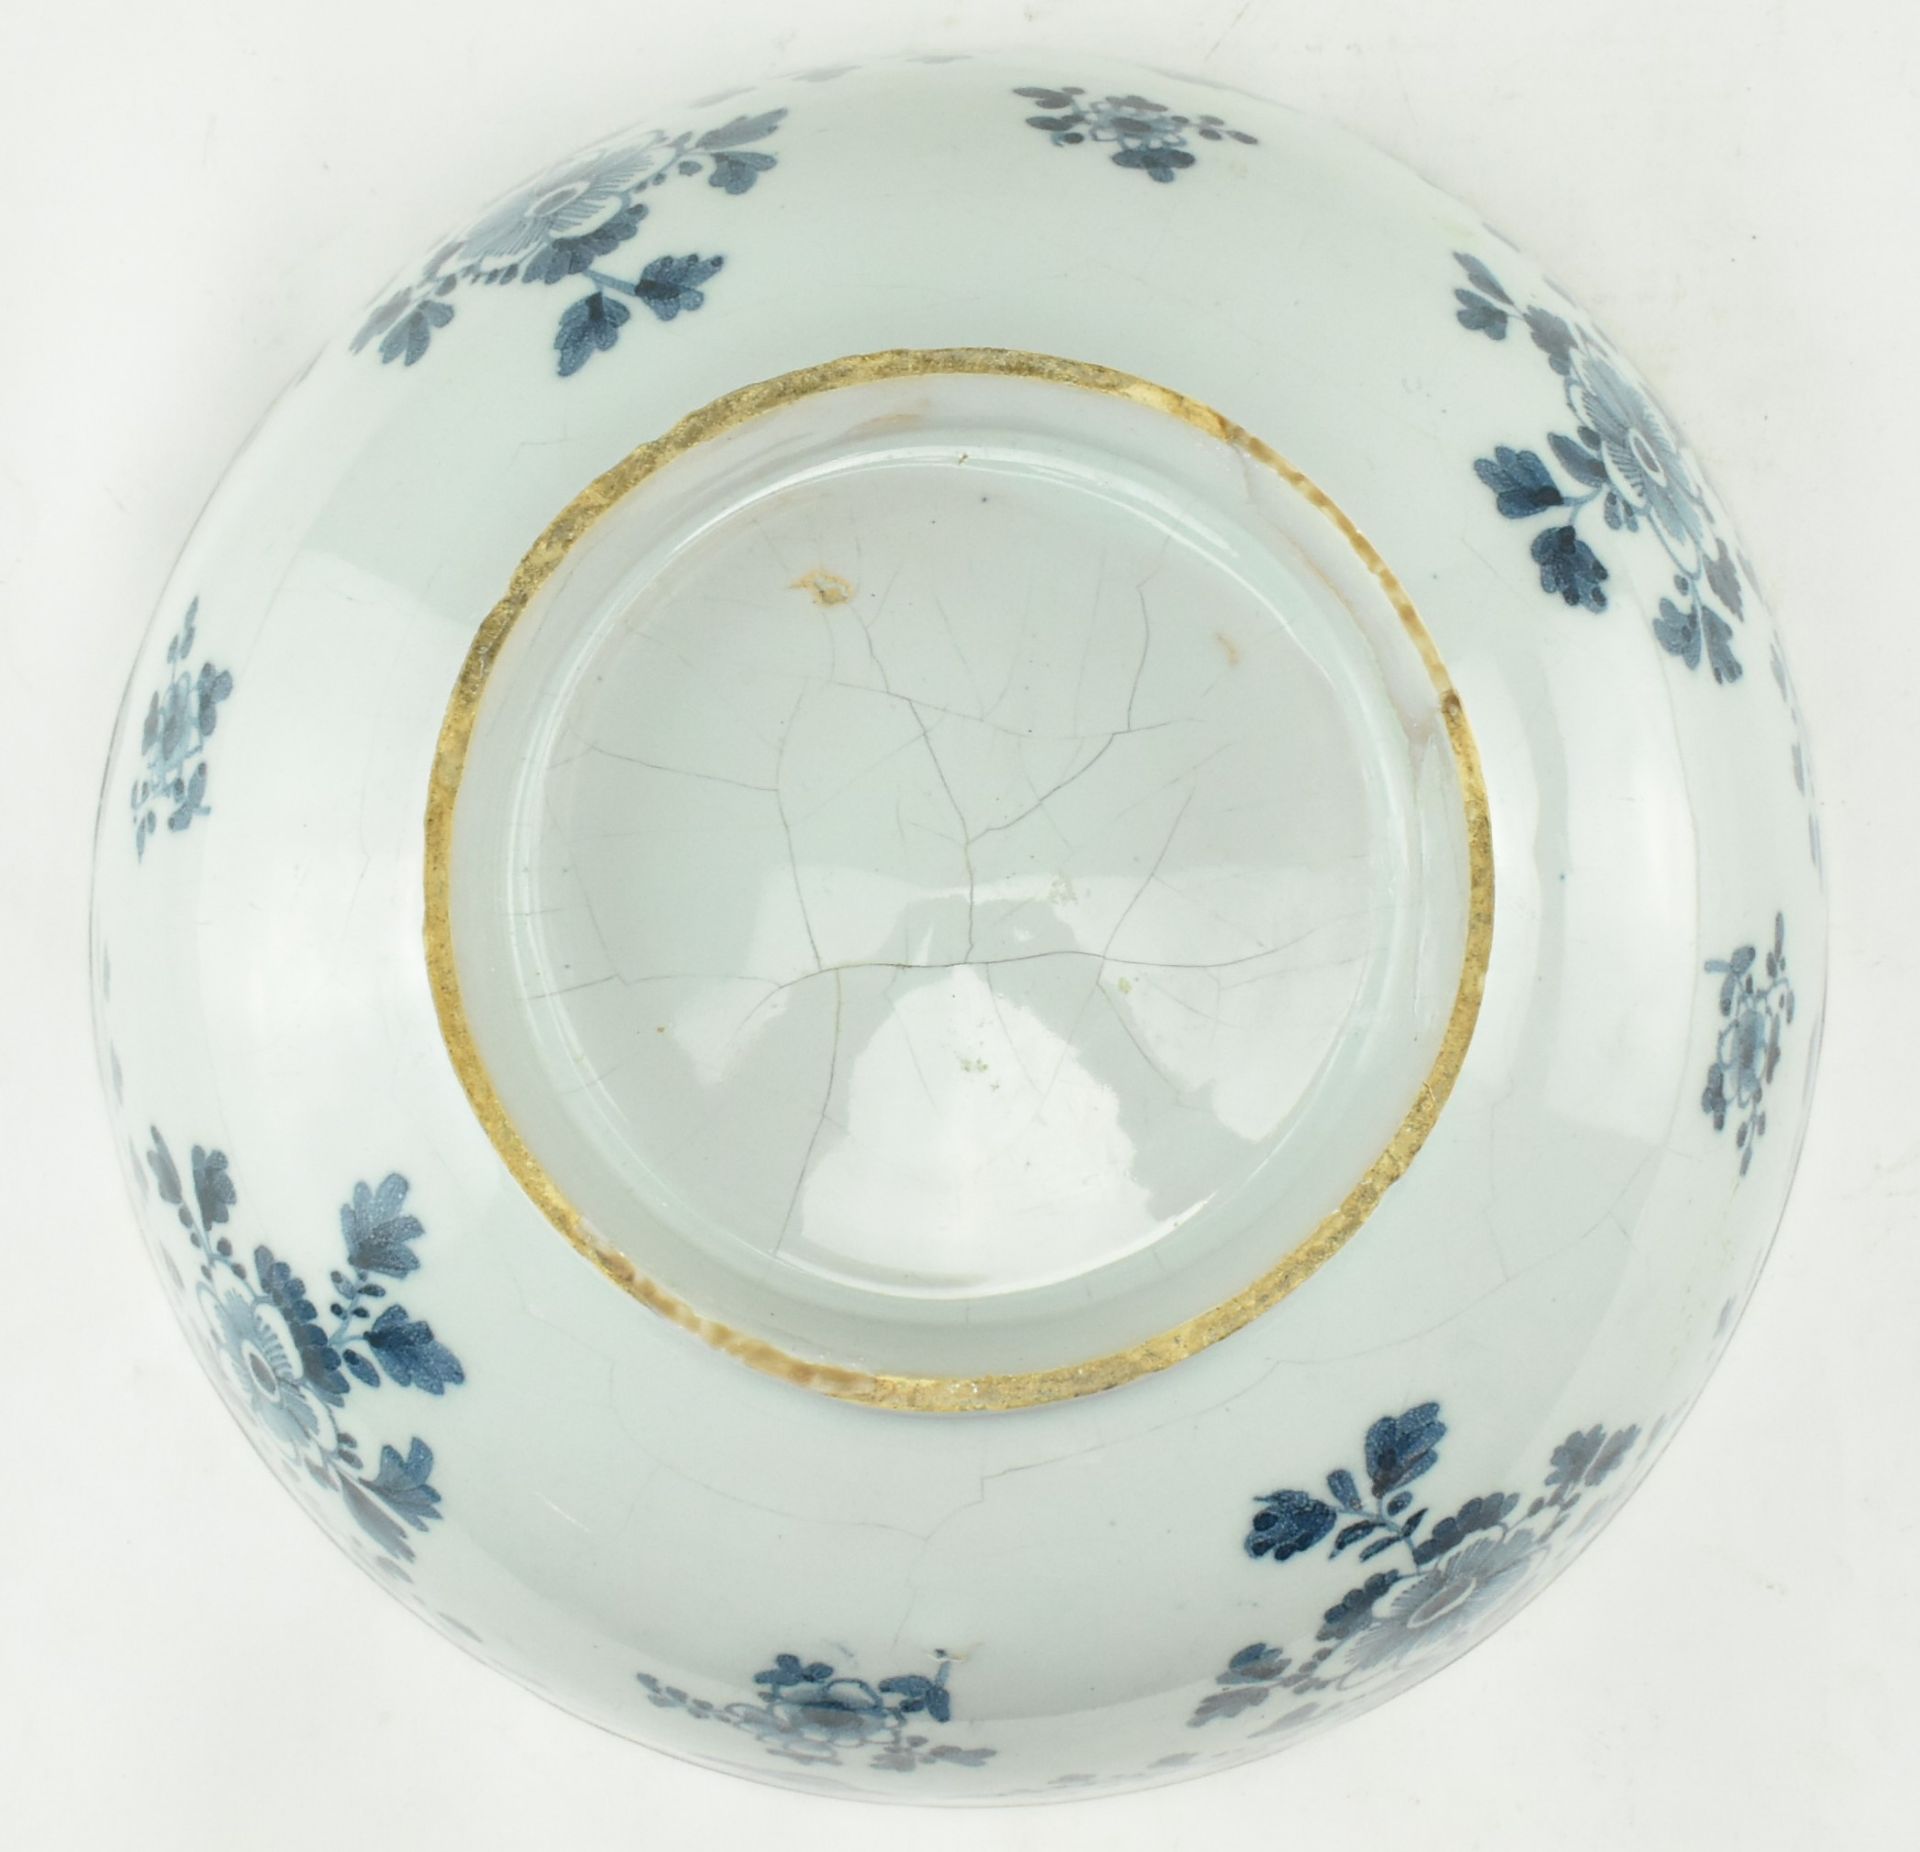 BELIEVED 18TH CENTURY ENGLISH BLUE & WHITE DELFT CERAMIC BOWL - Image 4 of 8